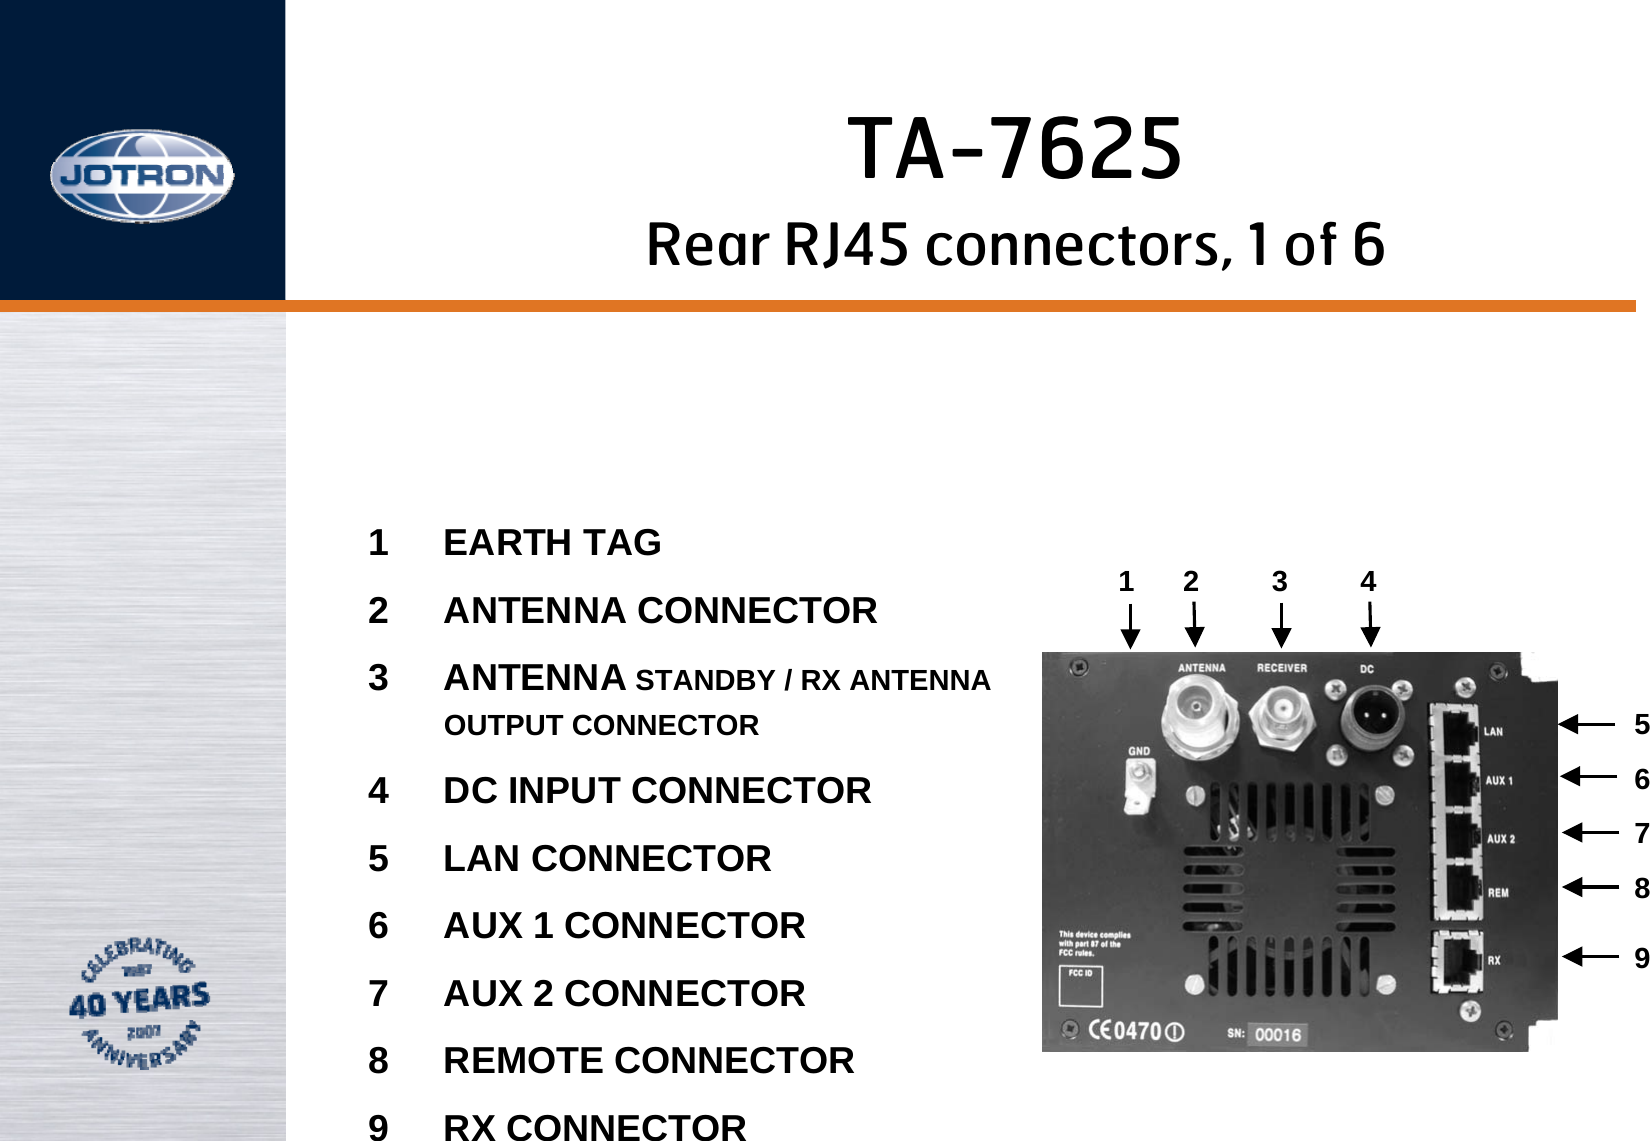 Rear RJ45 connectors, 1 of 6567891 EARTH TAG2 ANTENNA CONNECTOR3 ANTENNA STANDBY / RX ANTENNA OUTPUT CONNECTOR4 DC INPUT CONNECTOR5 LAN CONNECTOR6 AUX 1 CONNECTOR7 AUX 2 CONNECTOR8 REMOTE CONNECTOR9 RX CONNECTORTA-76251      2         3         4  